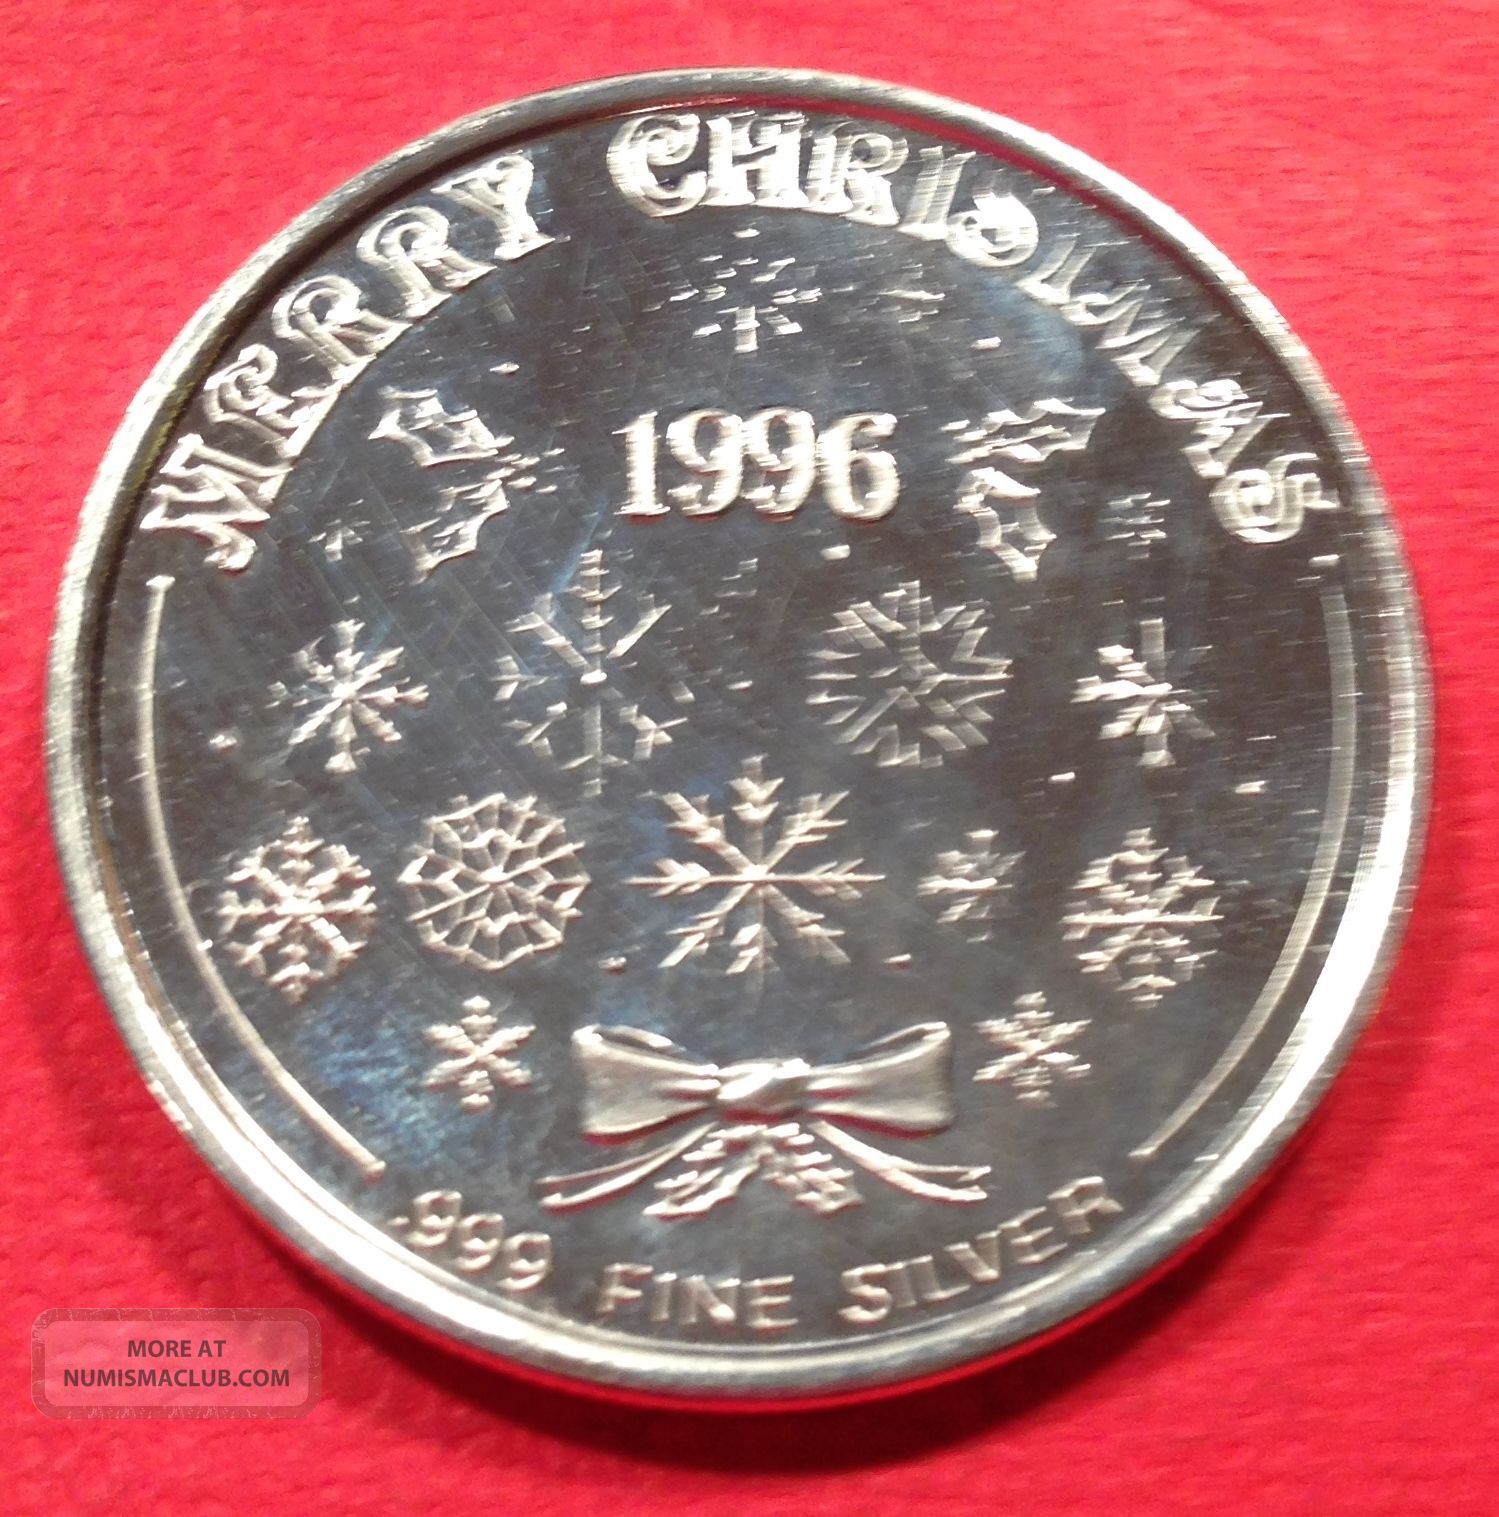 1996-merry-chirstmas-to-all-the-children-1-troy-oz-999-fine-silver